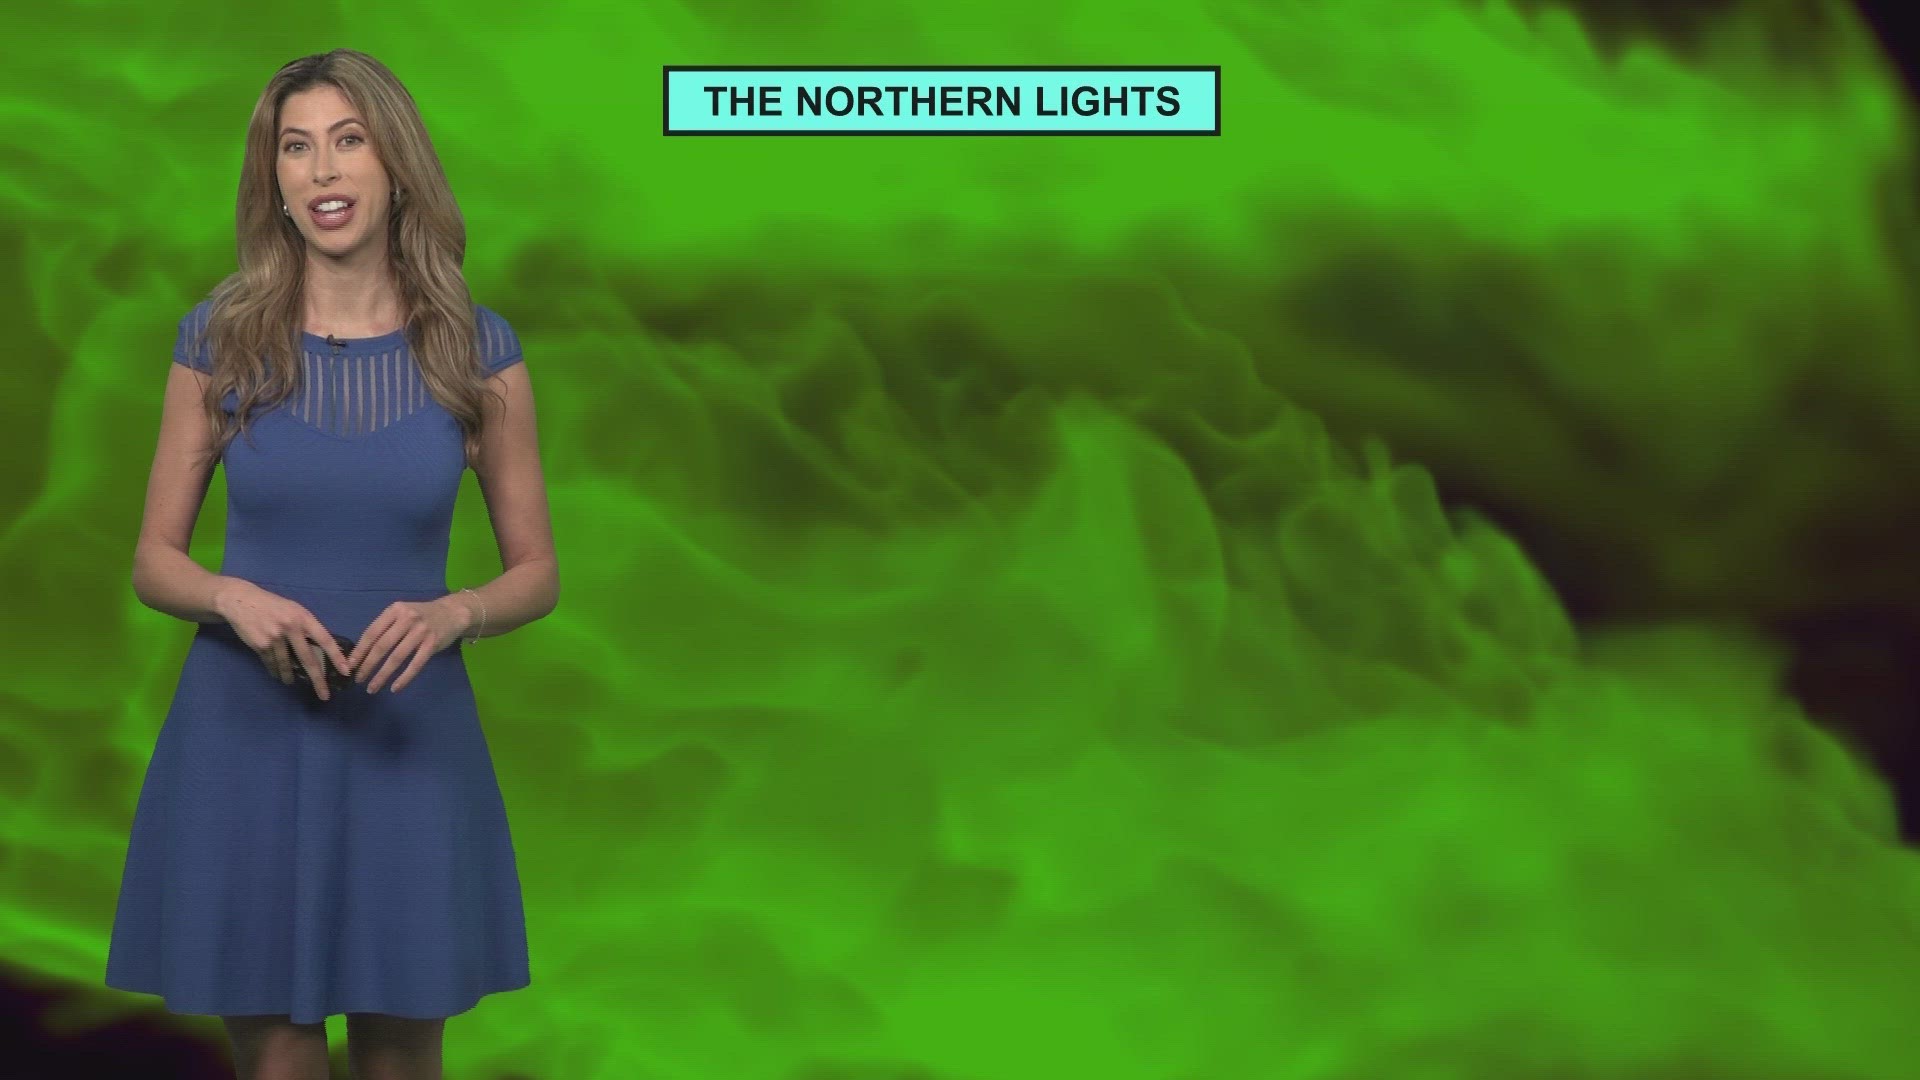 KHOU 11 News Meteorologist Kim Castro explains why we see the Northern Lights on Earth.